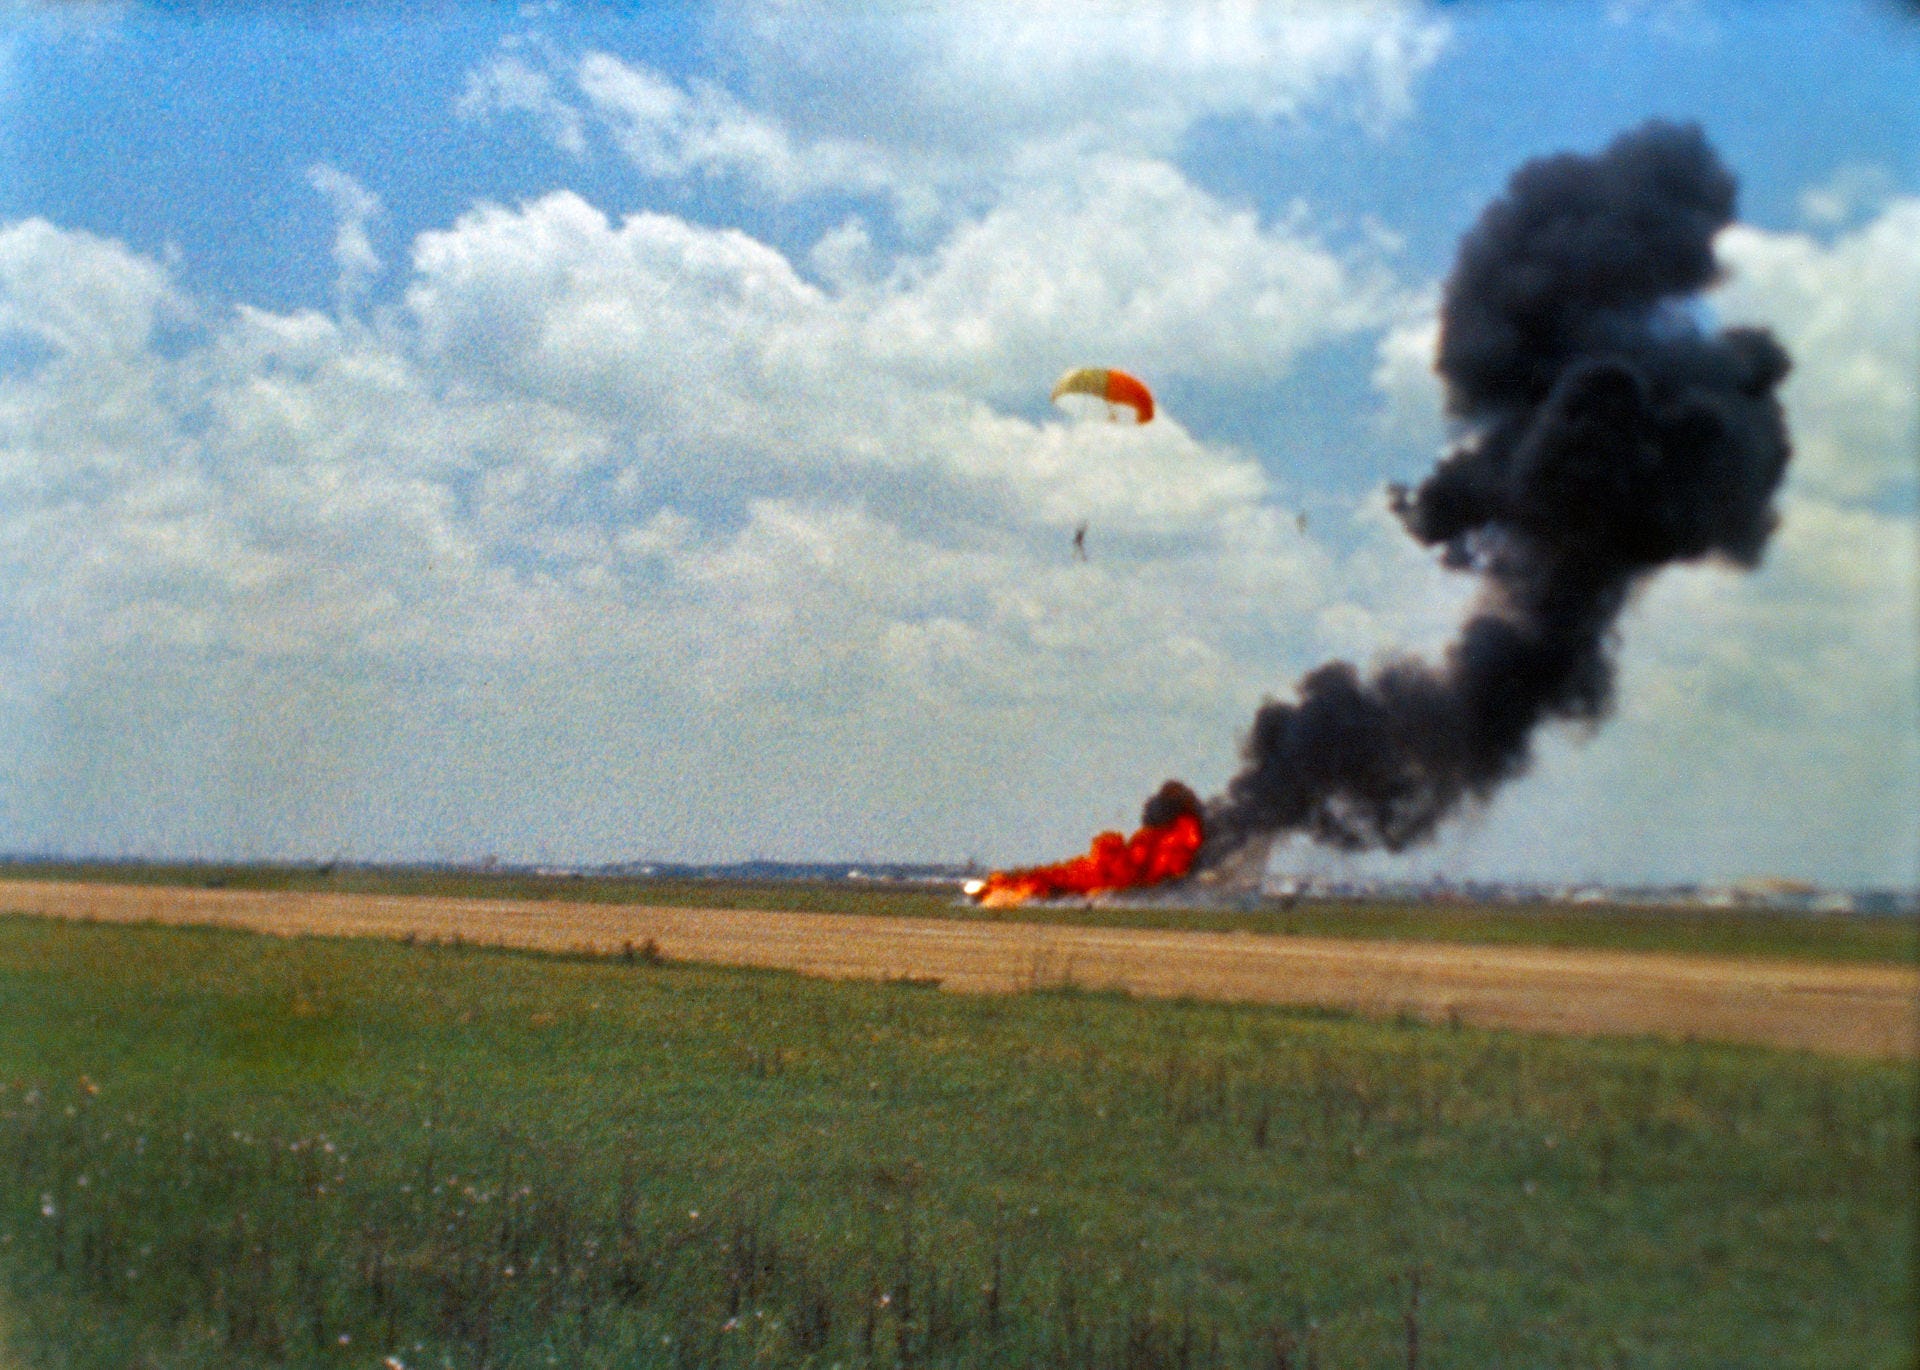 A fiery crash on the ground and a man parachuting above it.